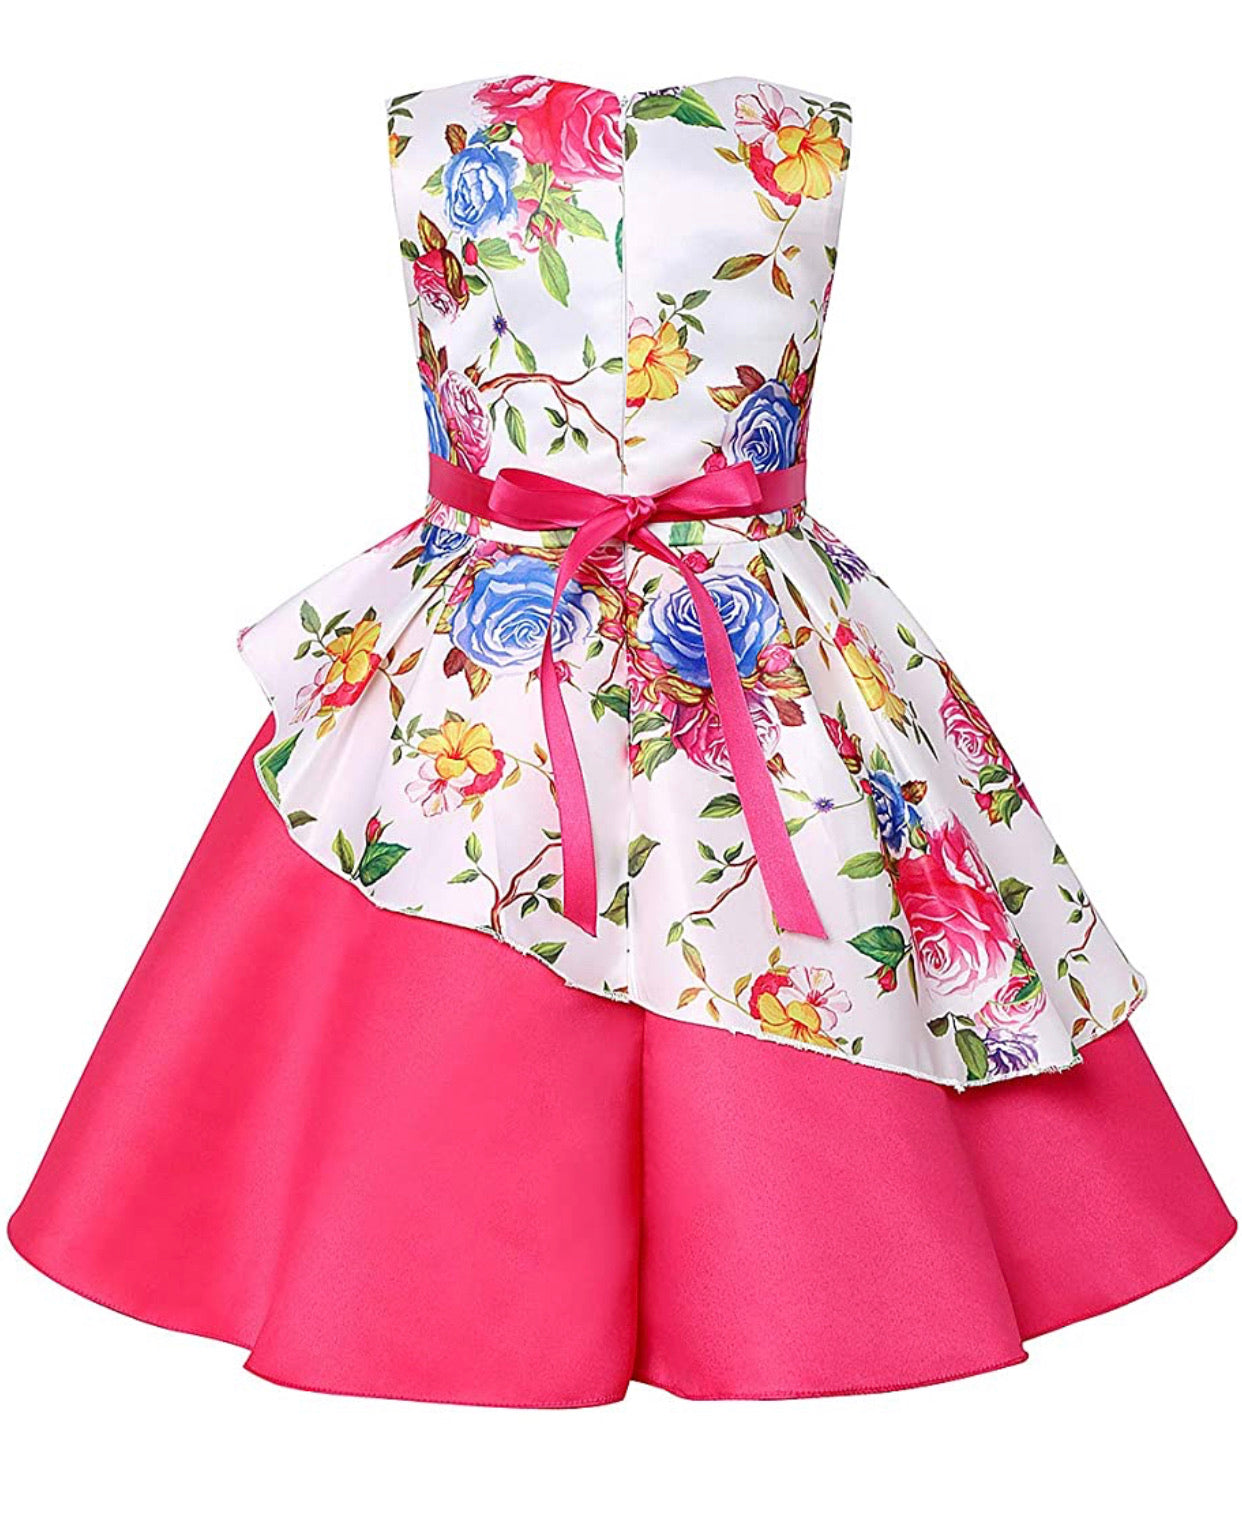 Little Girl’s Pink Floral Bow-Tie Party Dress, Sizes 2T - 14 years